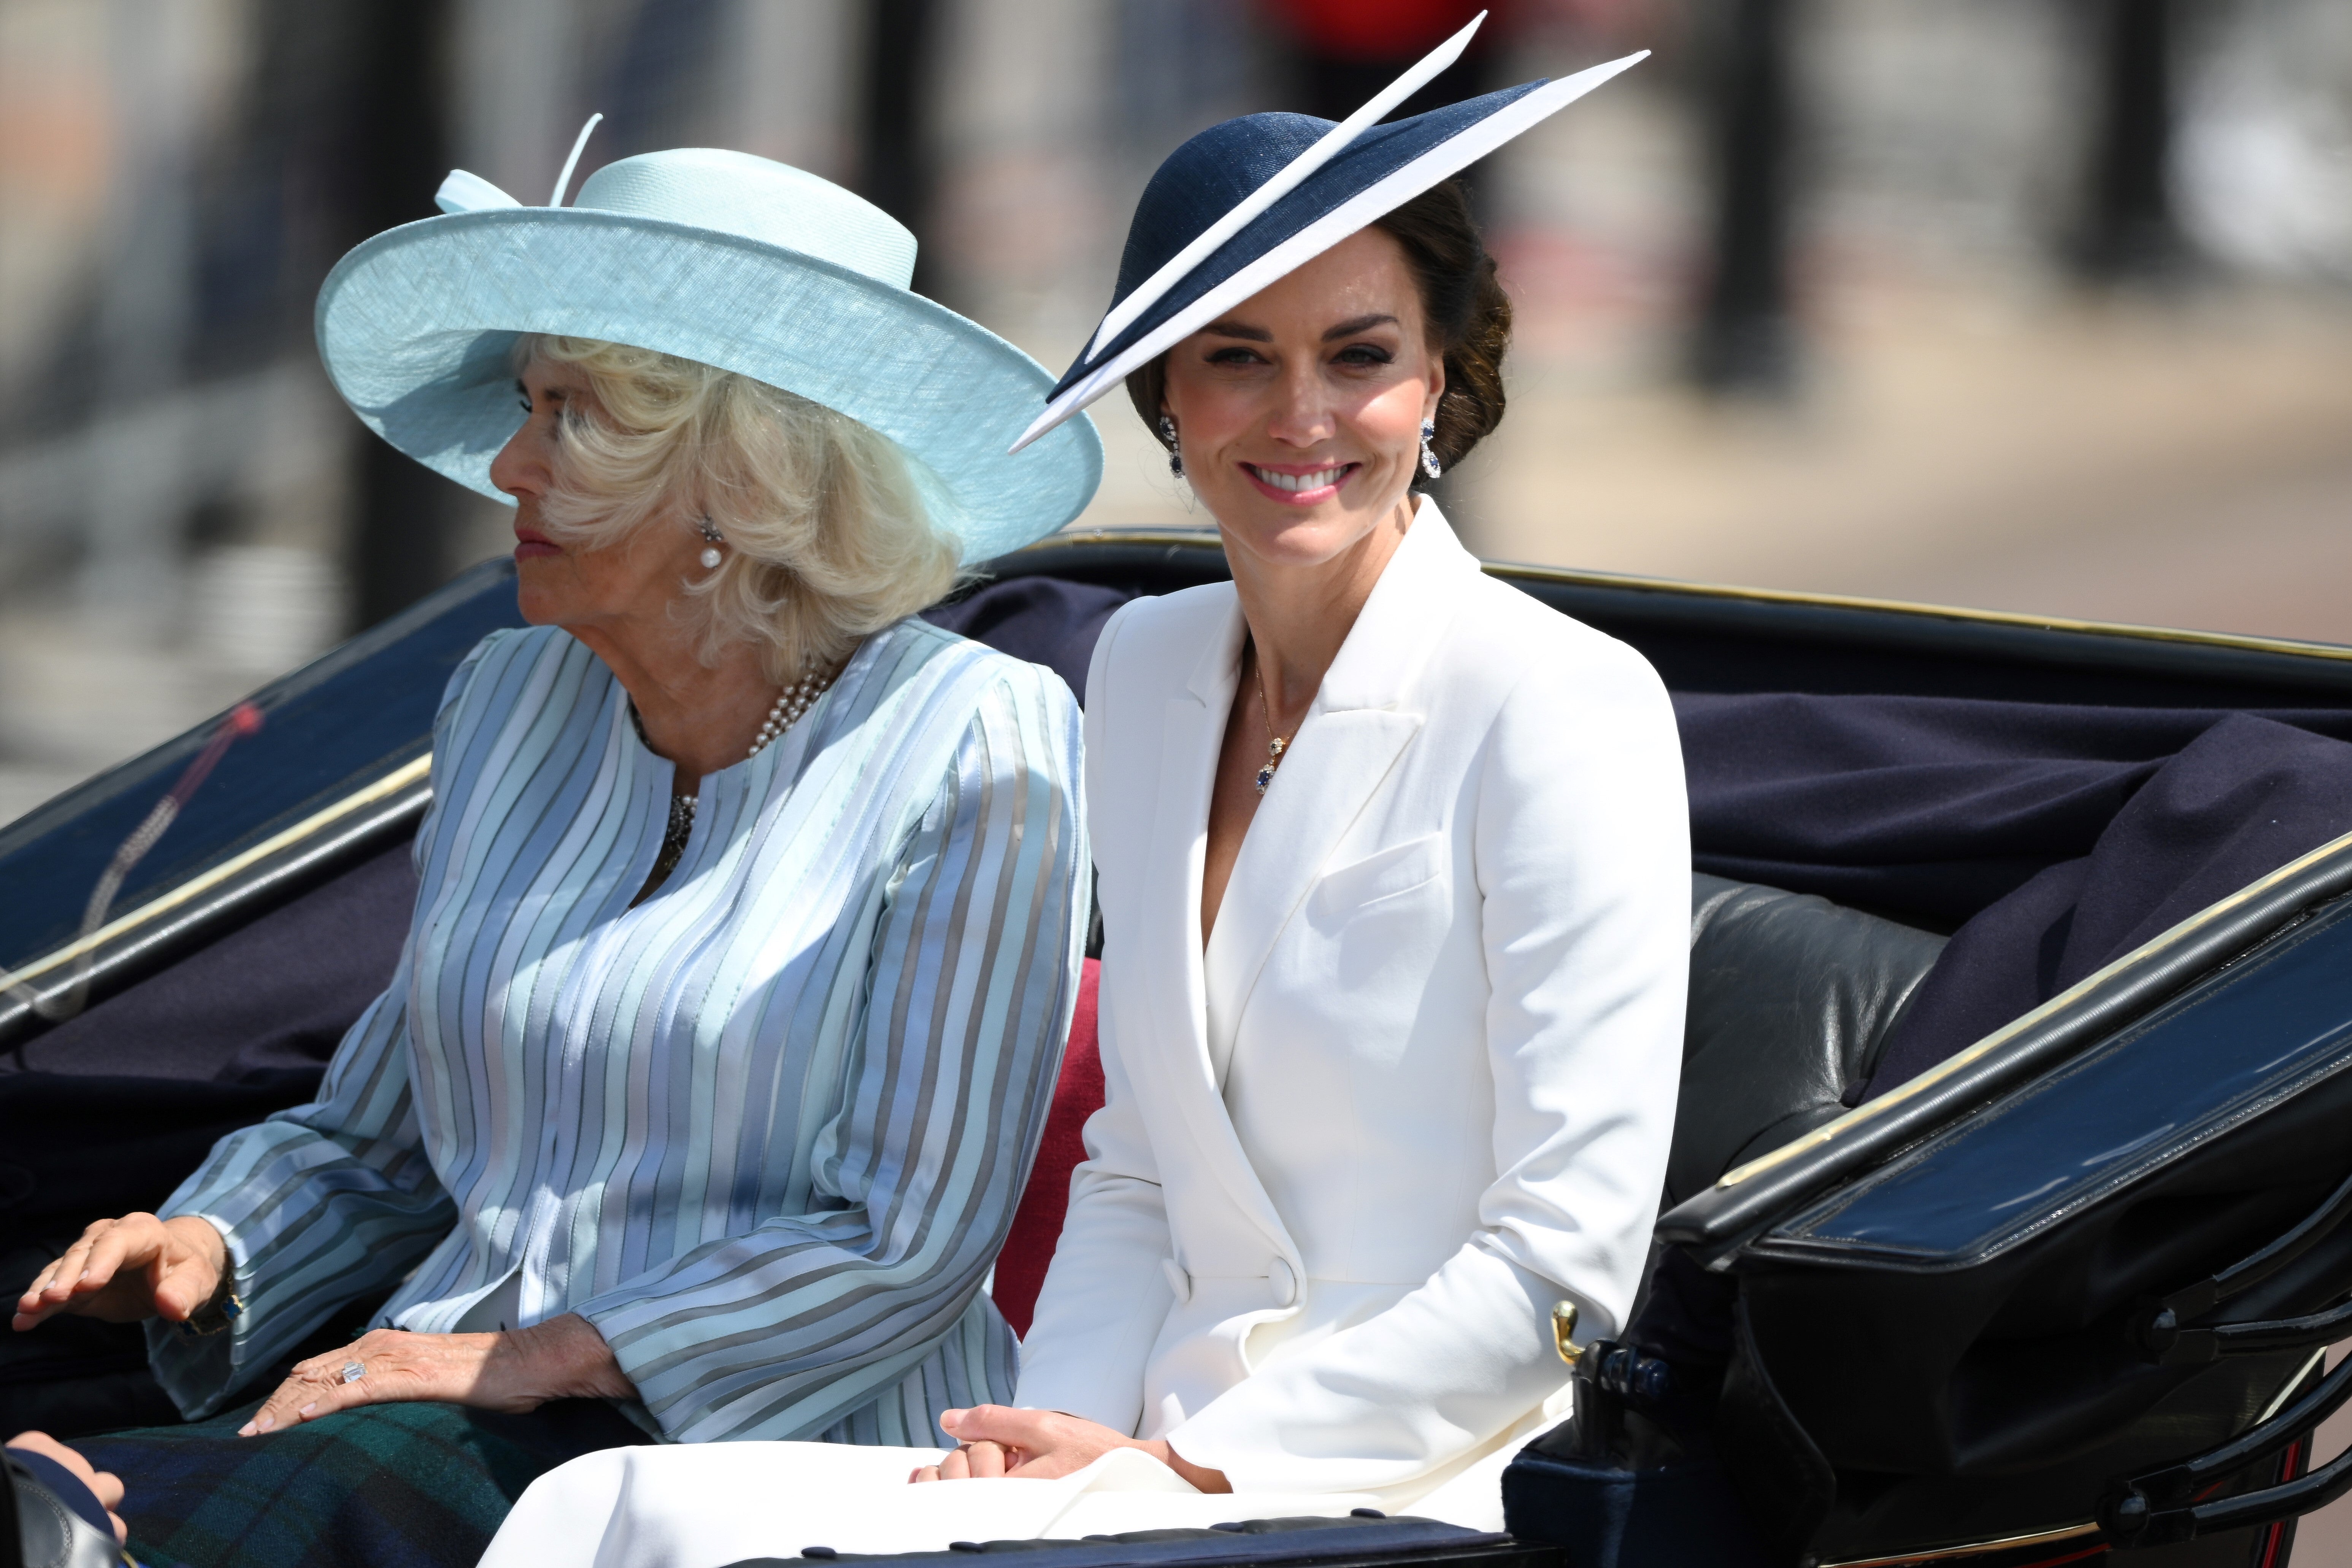 The Duchess of Cornwall and the Duchess of Cambridge during the Trooping the Colour ceremony at Horse Guards Parade, central London, as the Queen celebrates her official birthday, on day one of the Platinum Jubilee celebrations (Adrian Dennis/PA)